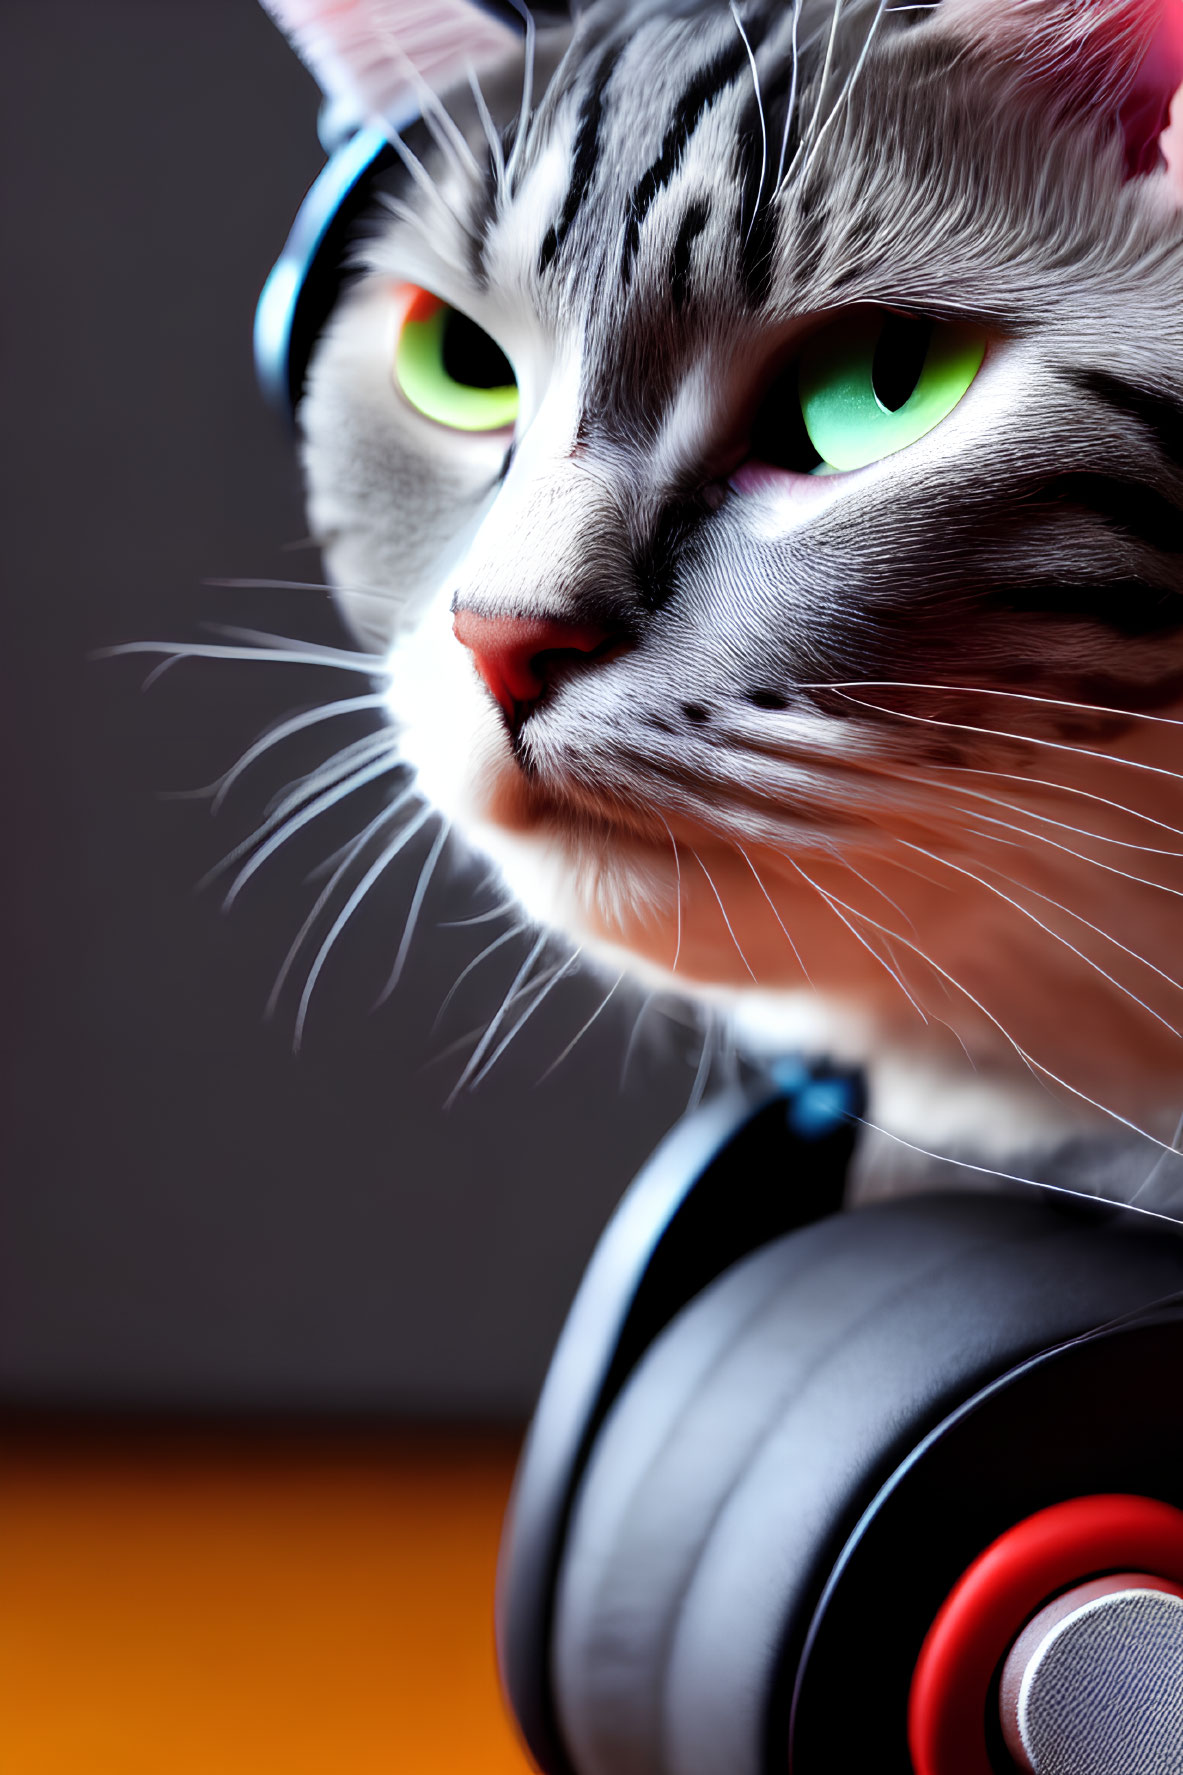 Cat with Green Eyes in Black and Red Headphones on Orange Background